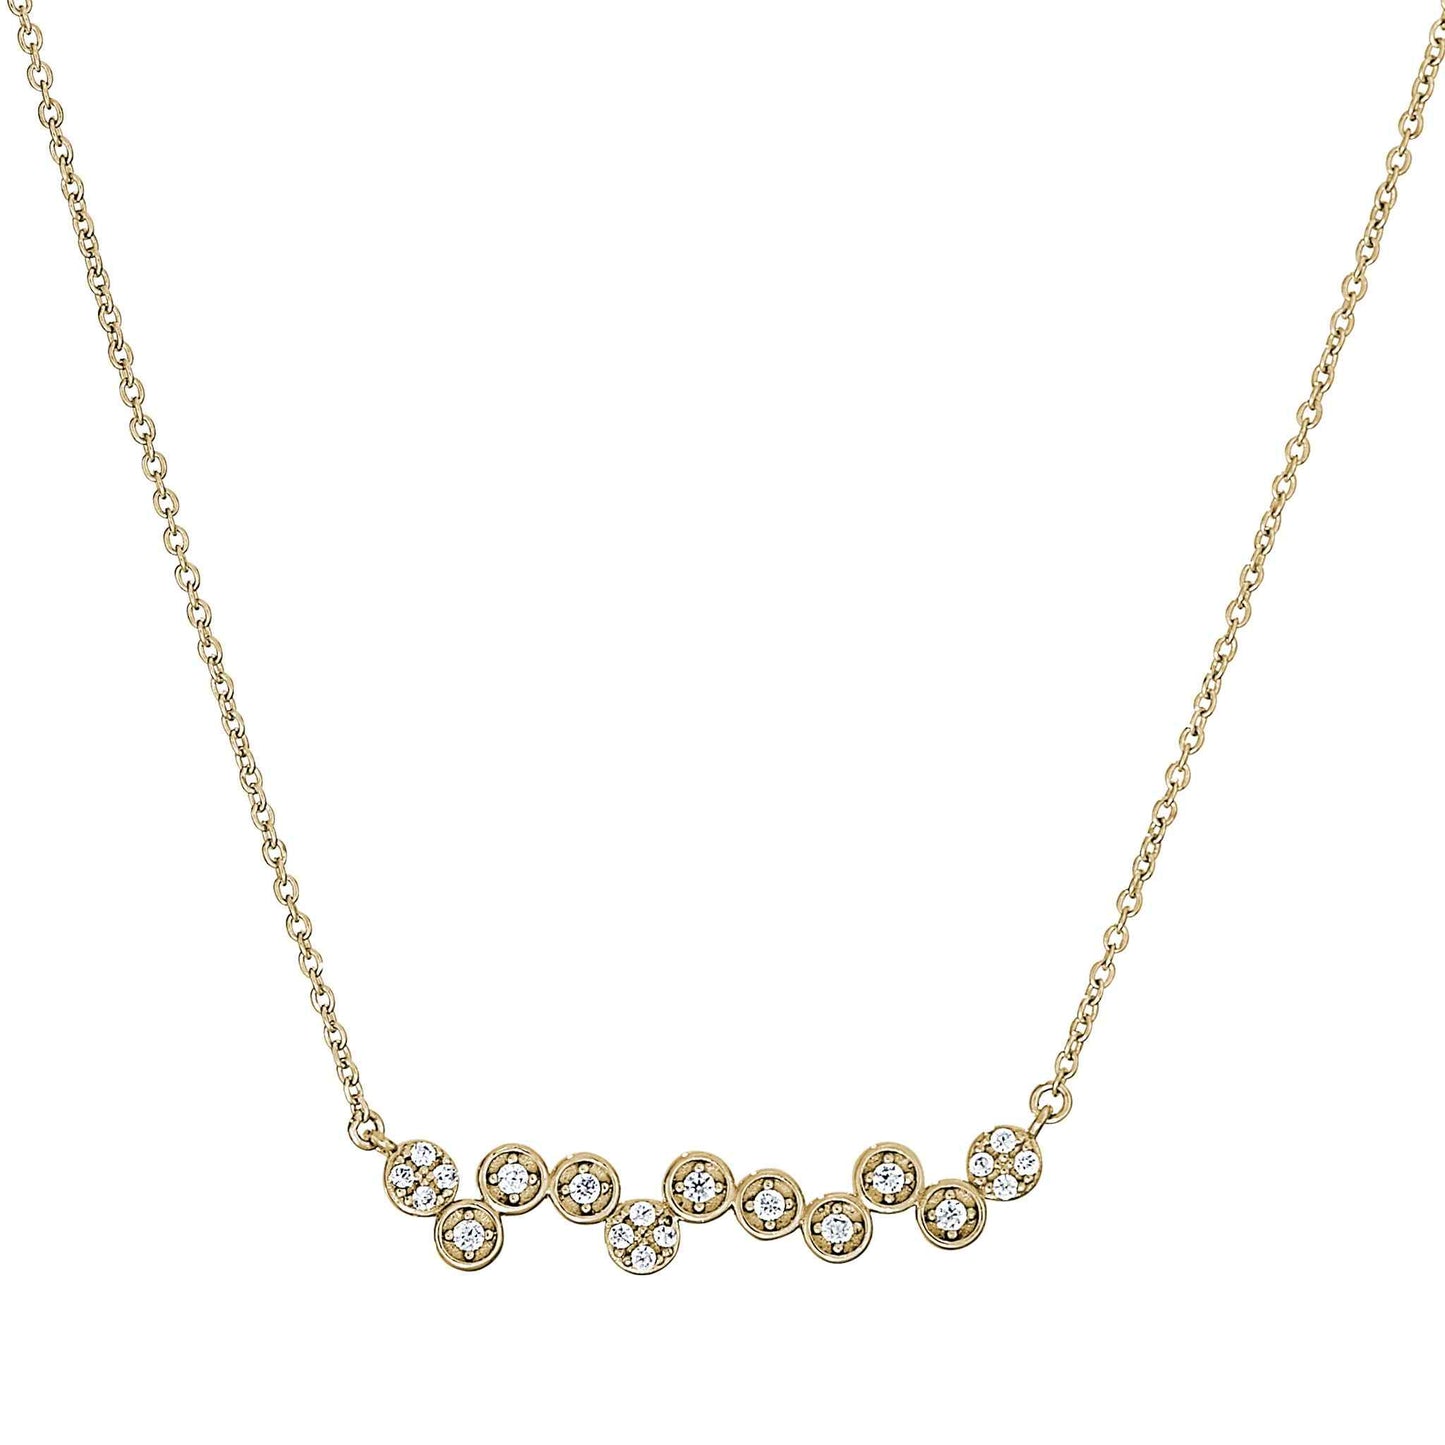 A bubbles necklace with simulated diamonds displayed on a neutral white background.